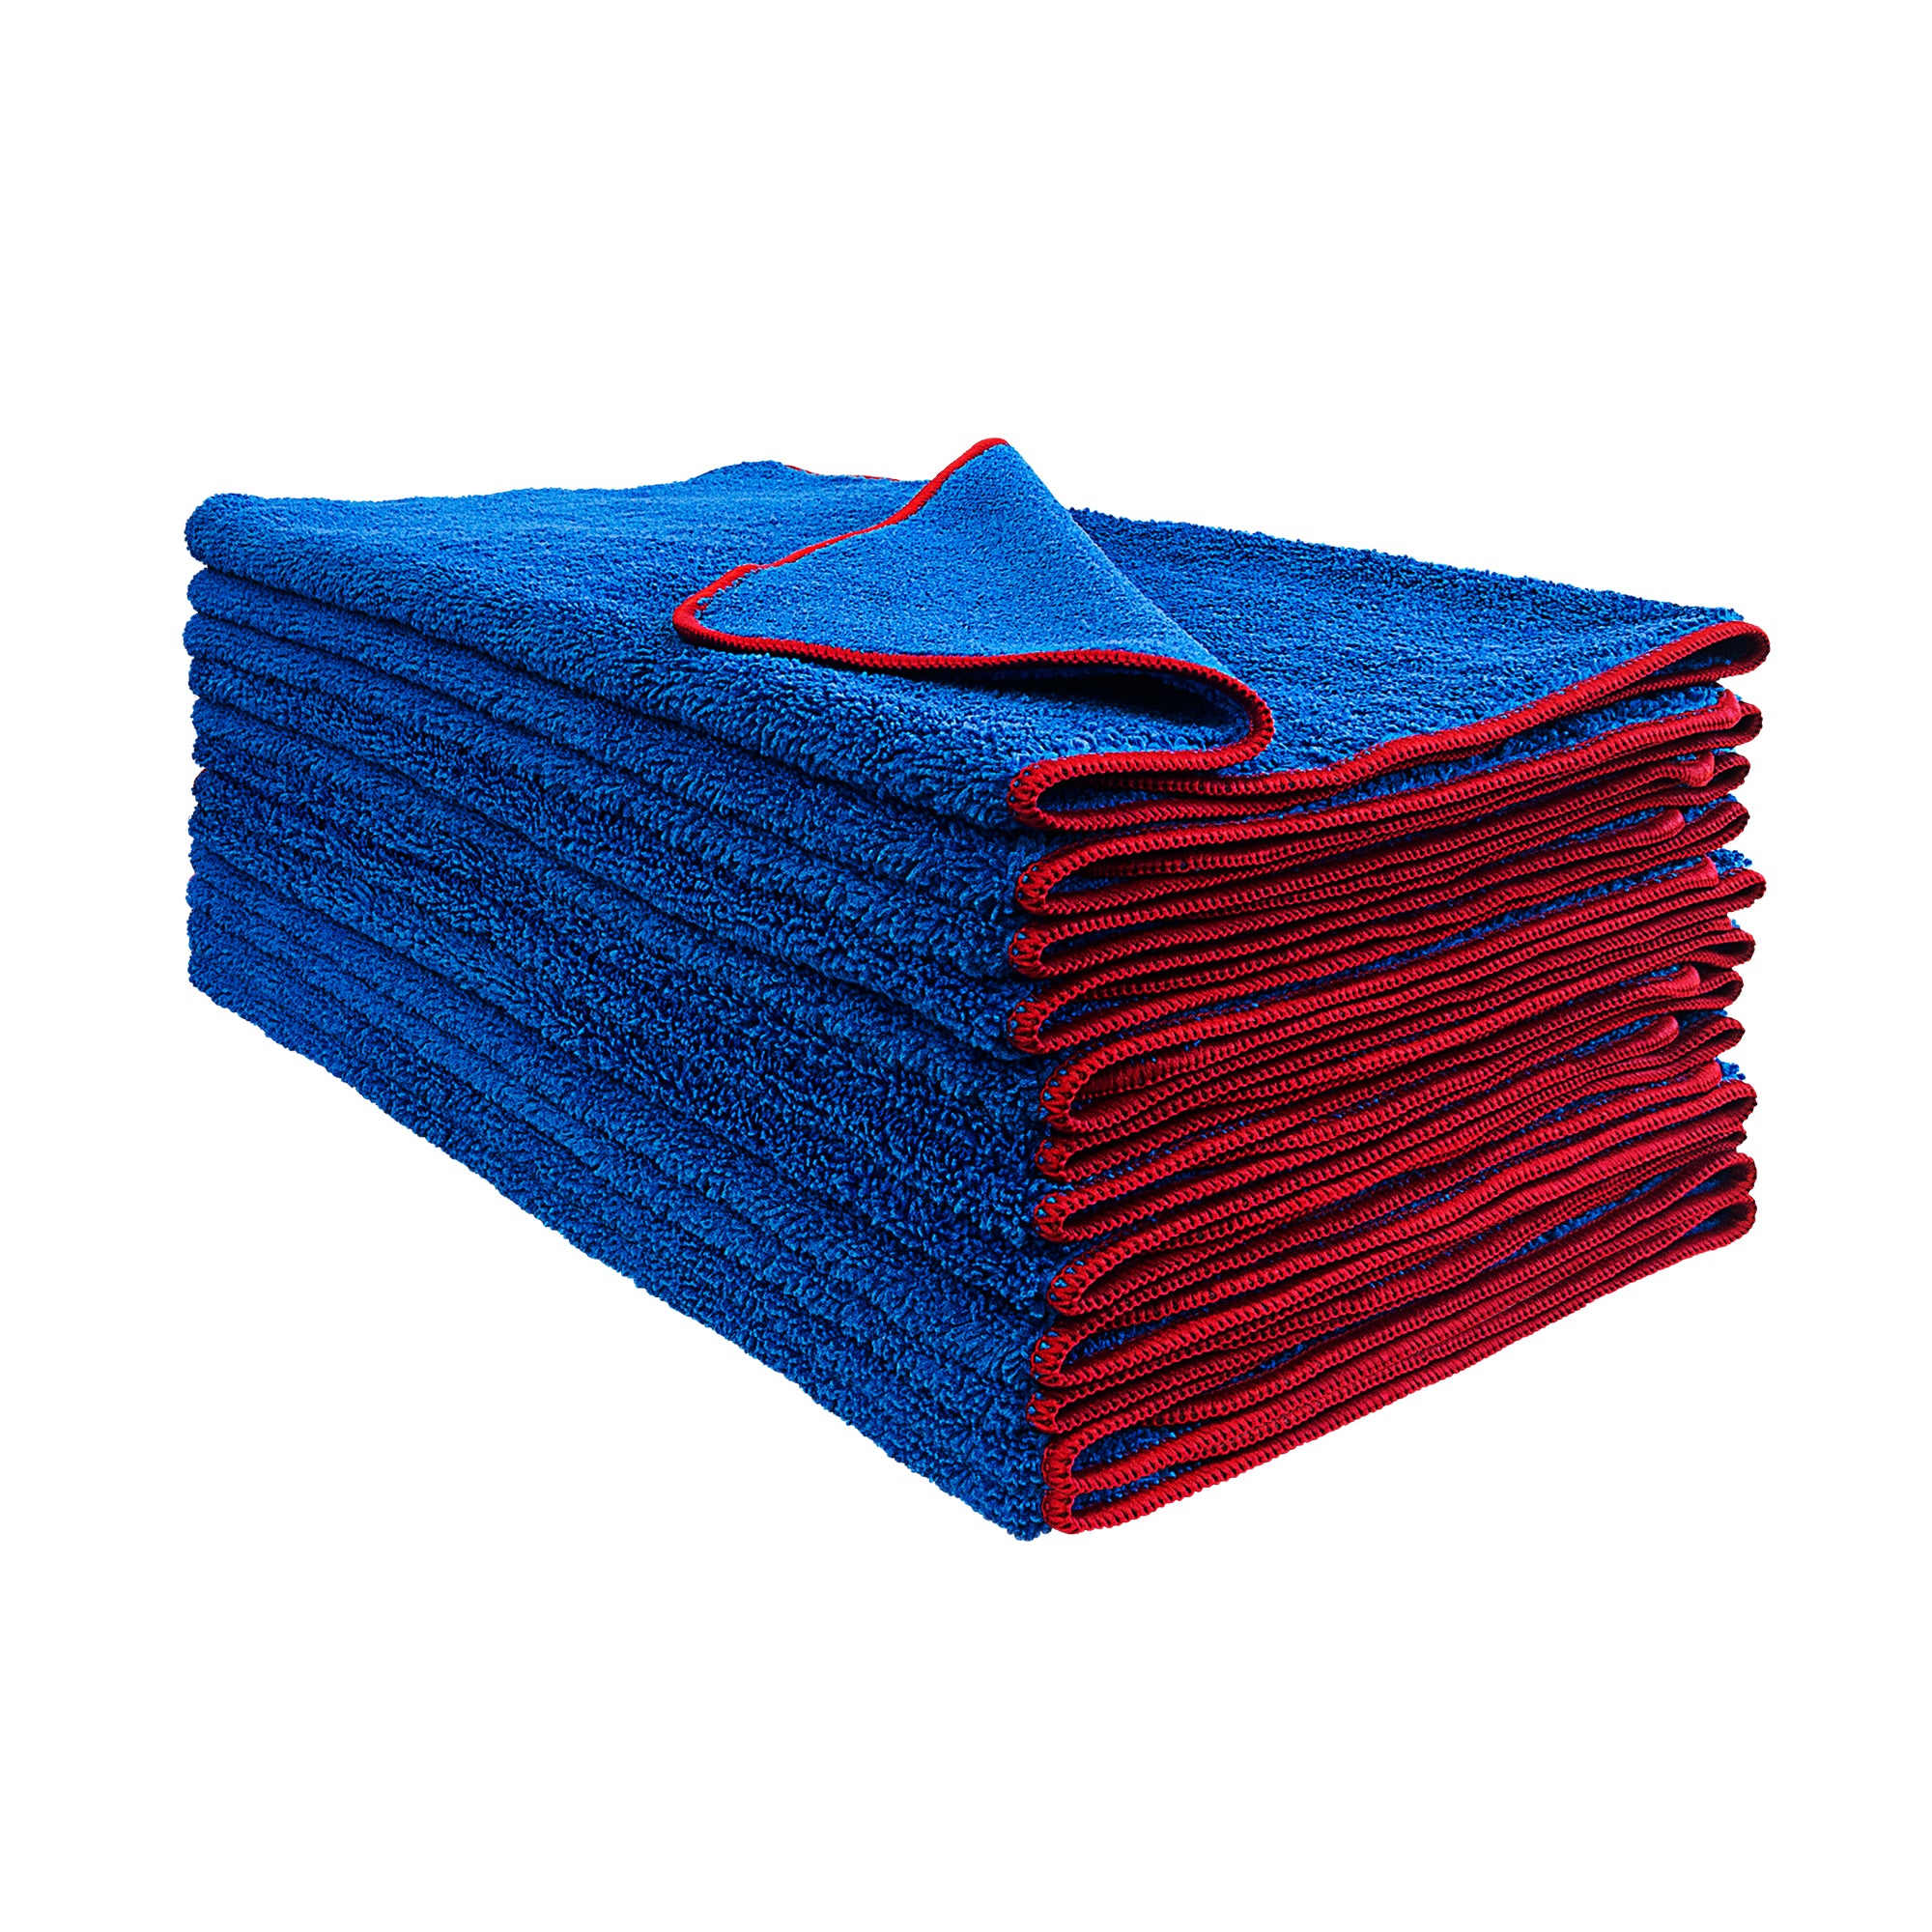 Nouvelle Legende Microfiber Waffle Weave Cleaning Towel, 16 x 16 Inches, Blue, 12 Pack